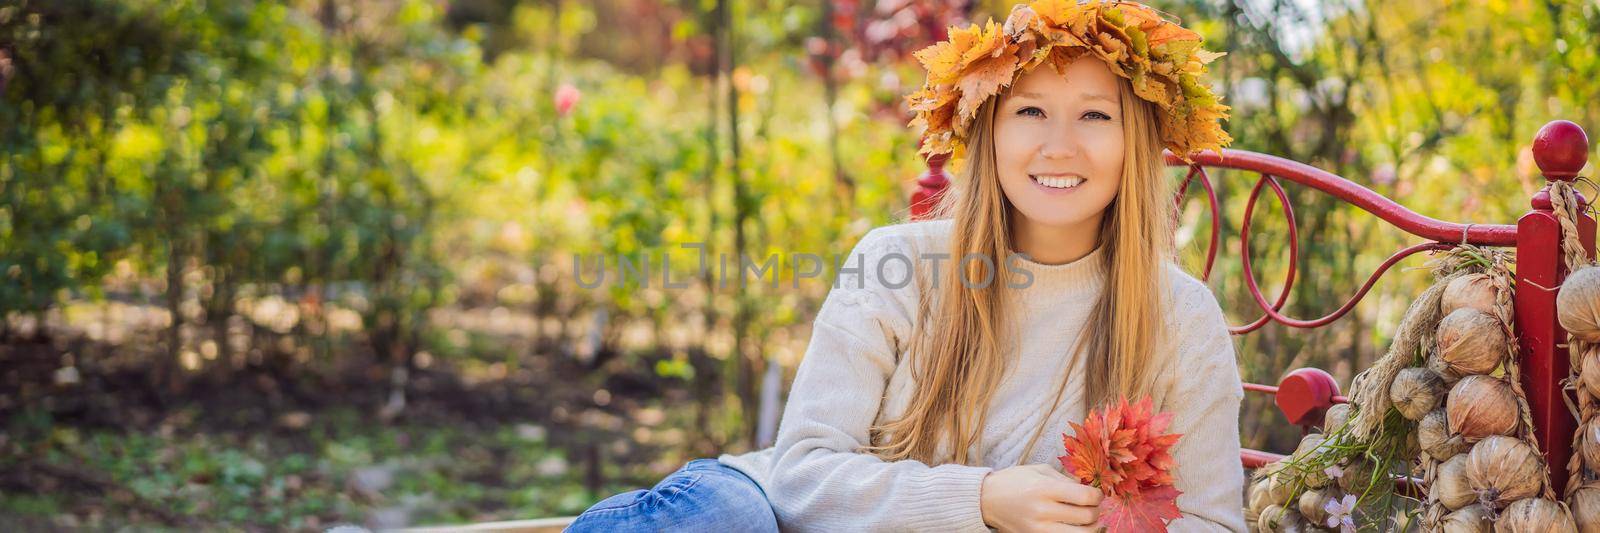 Outdoors lifestyle close up portrait of charming blonde young woman wearing a wreath of autumn leaves on a haystack. Wearing stylish knitted pullover. Wreath of maple leaves BANNER, LONG FORMAT by galitskaya